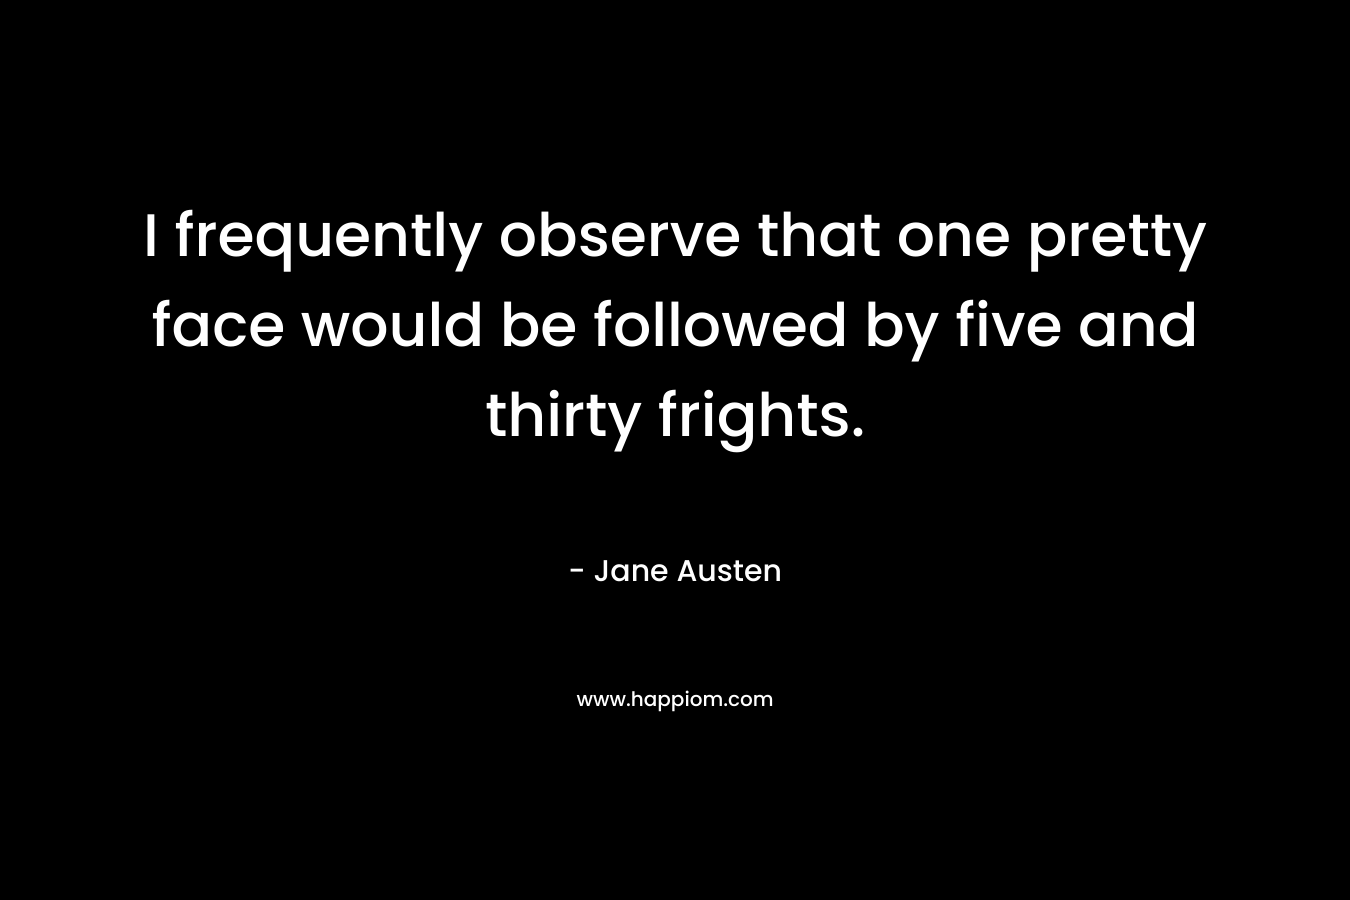 I frequently observe that one pretty face would be followed by five and thirty frights.